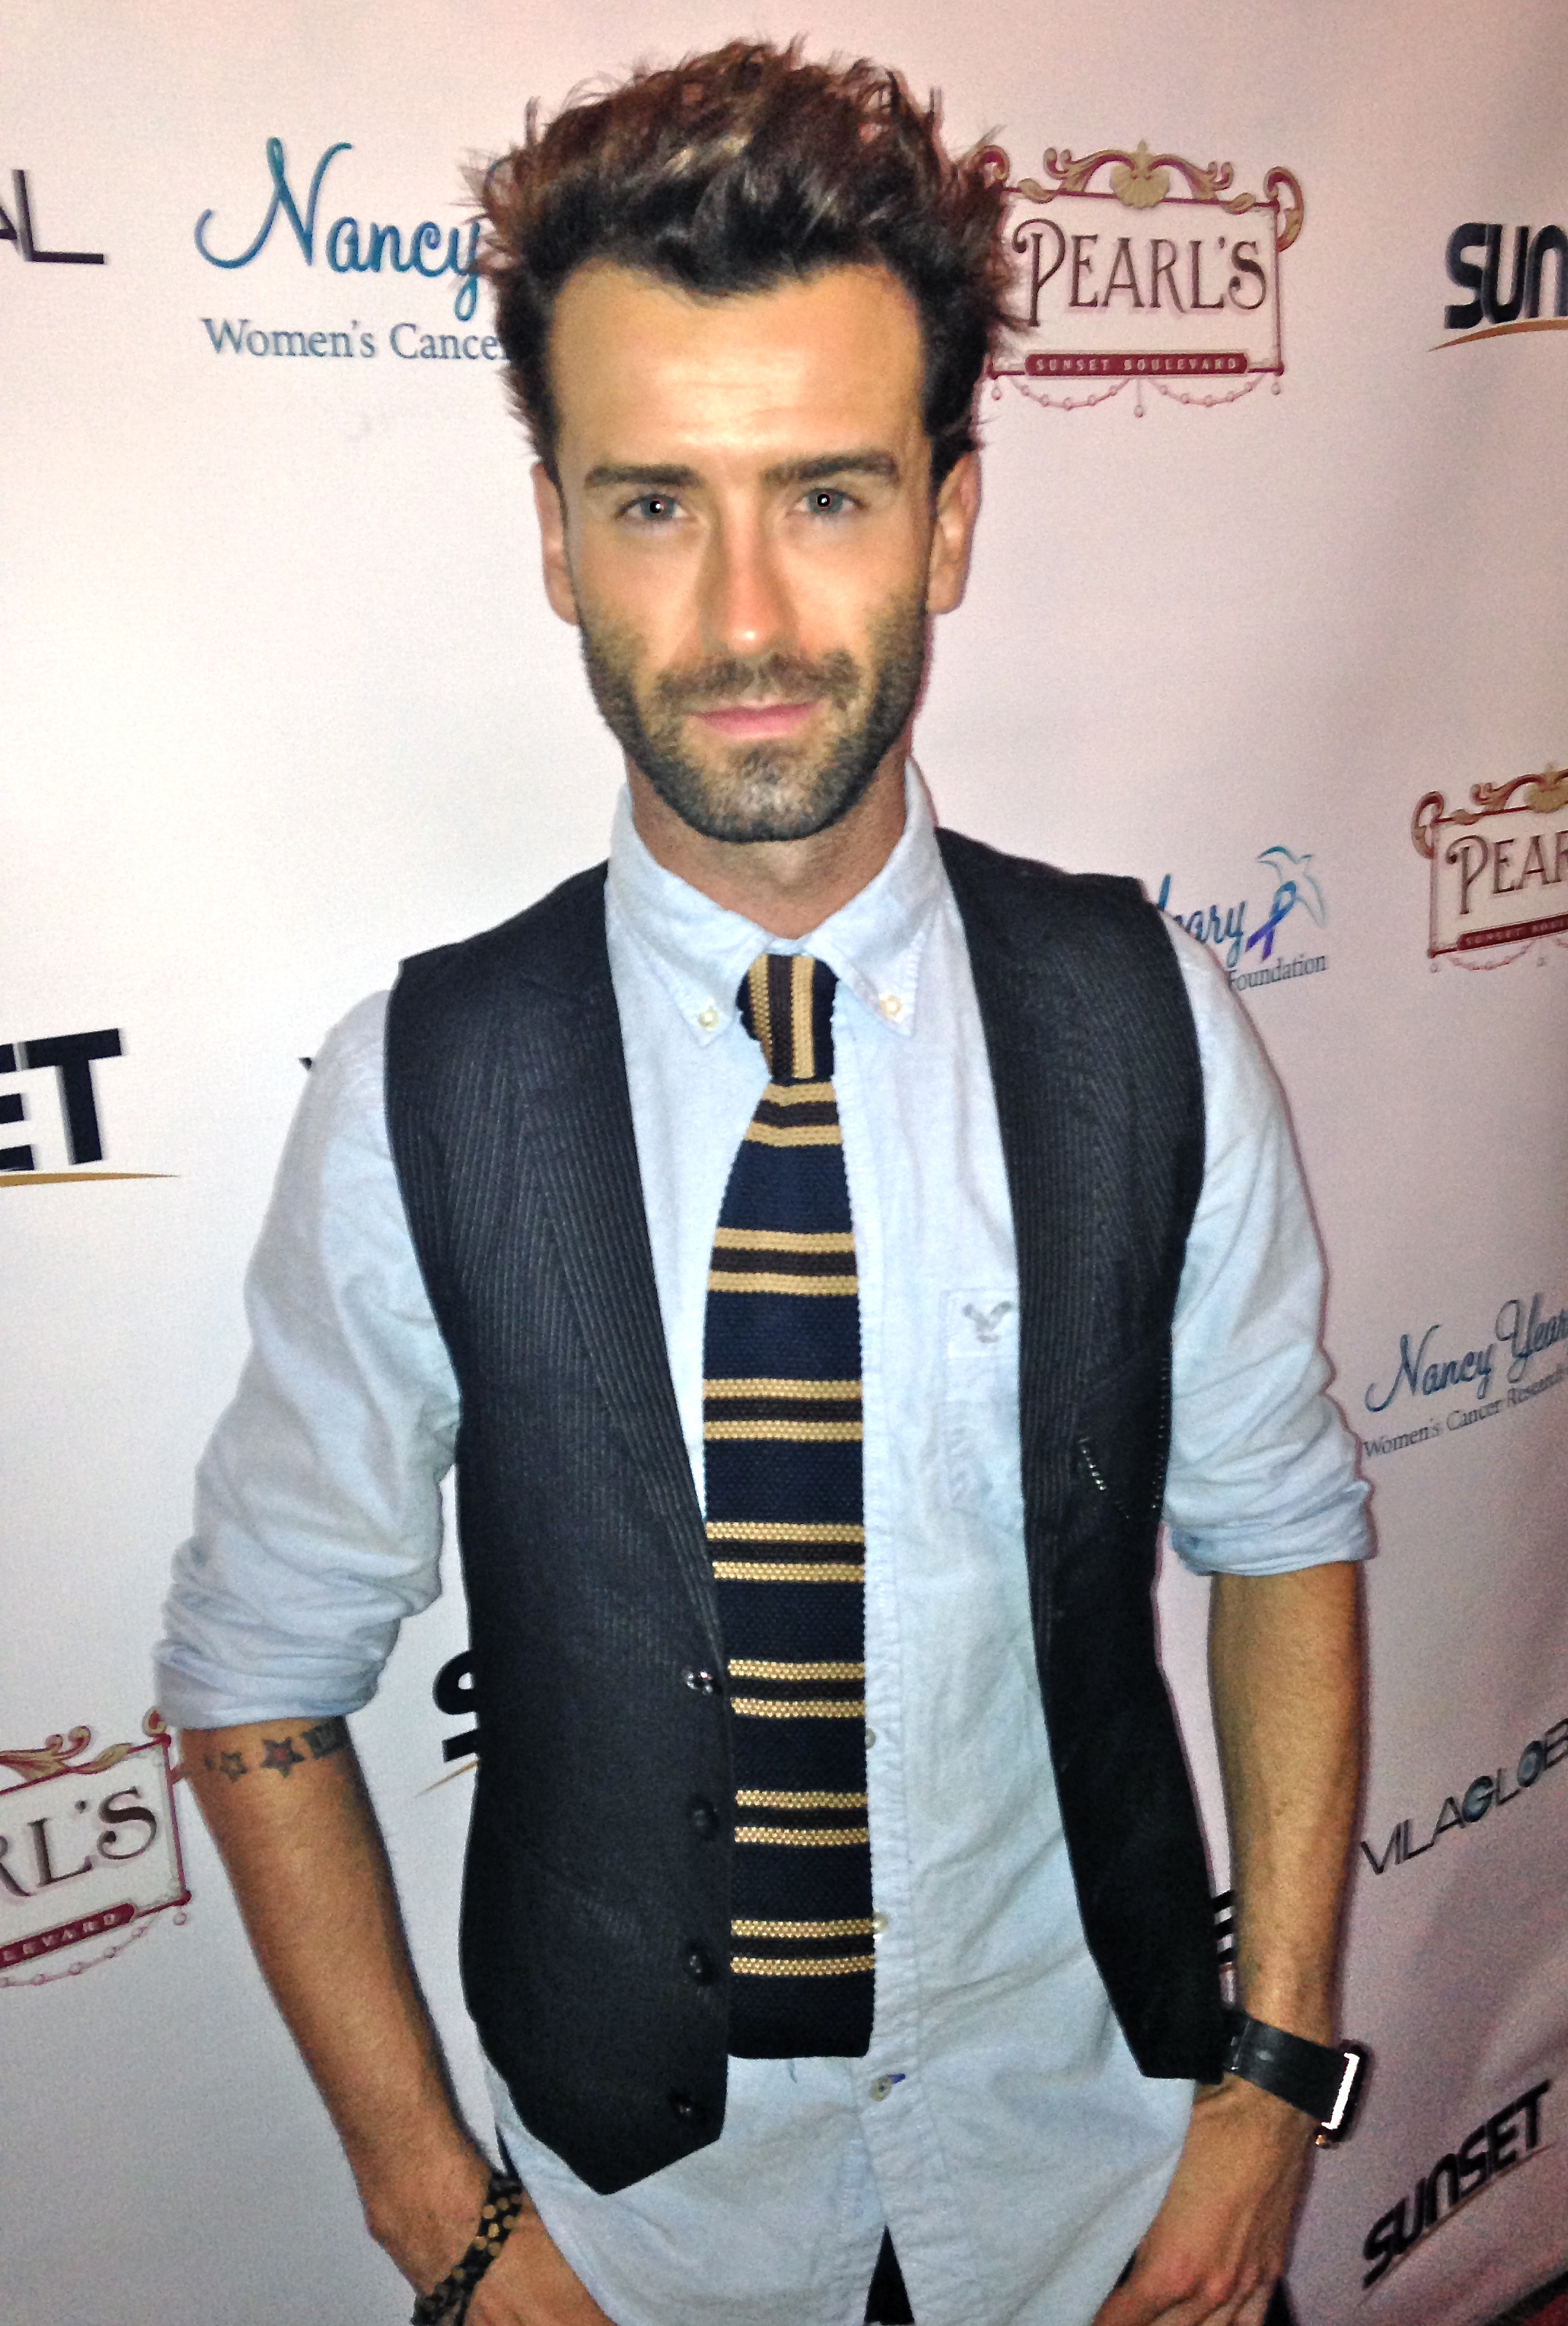 David Scharschmidt on the red carpet at Pearl's Oscar party in West Hollywood.